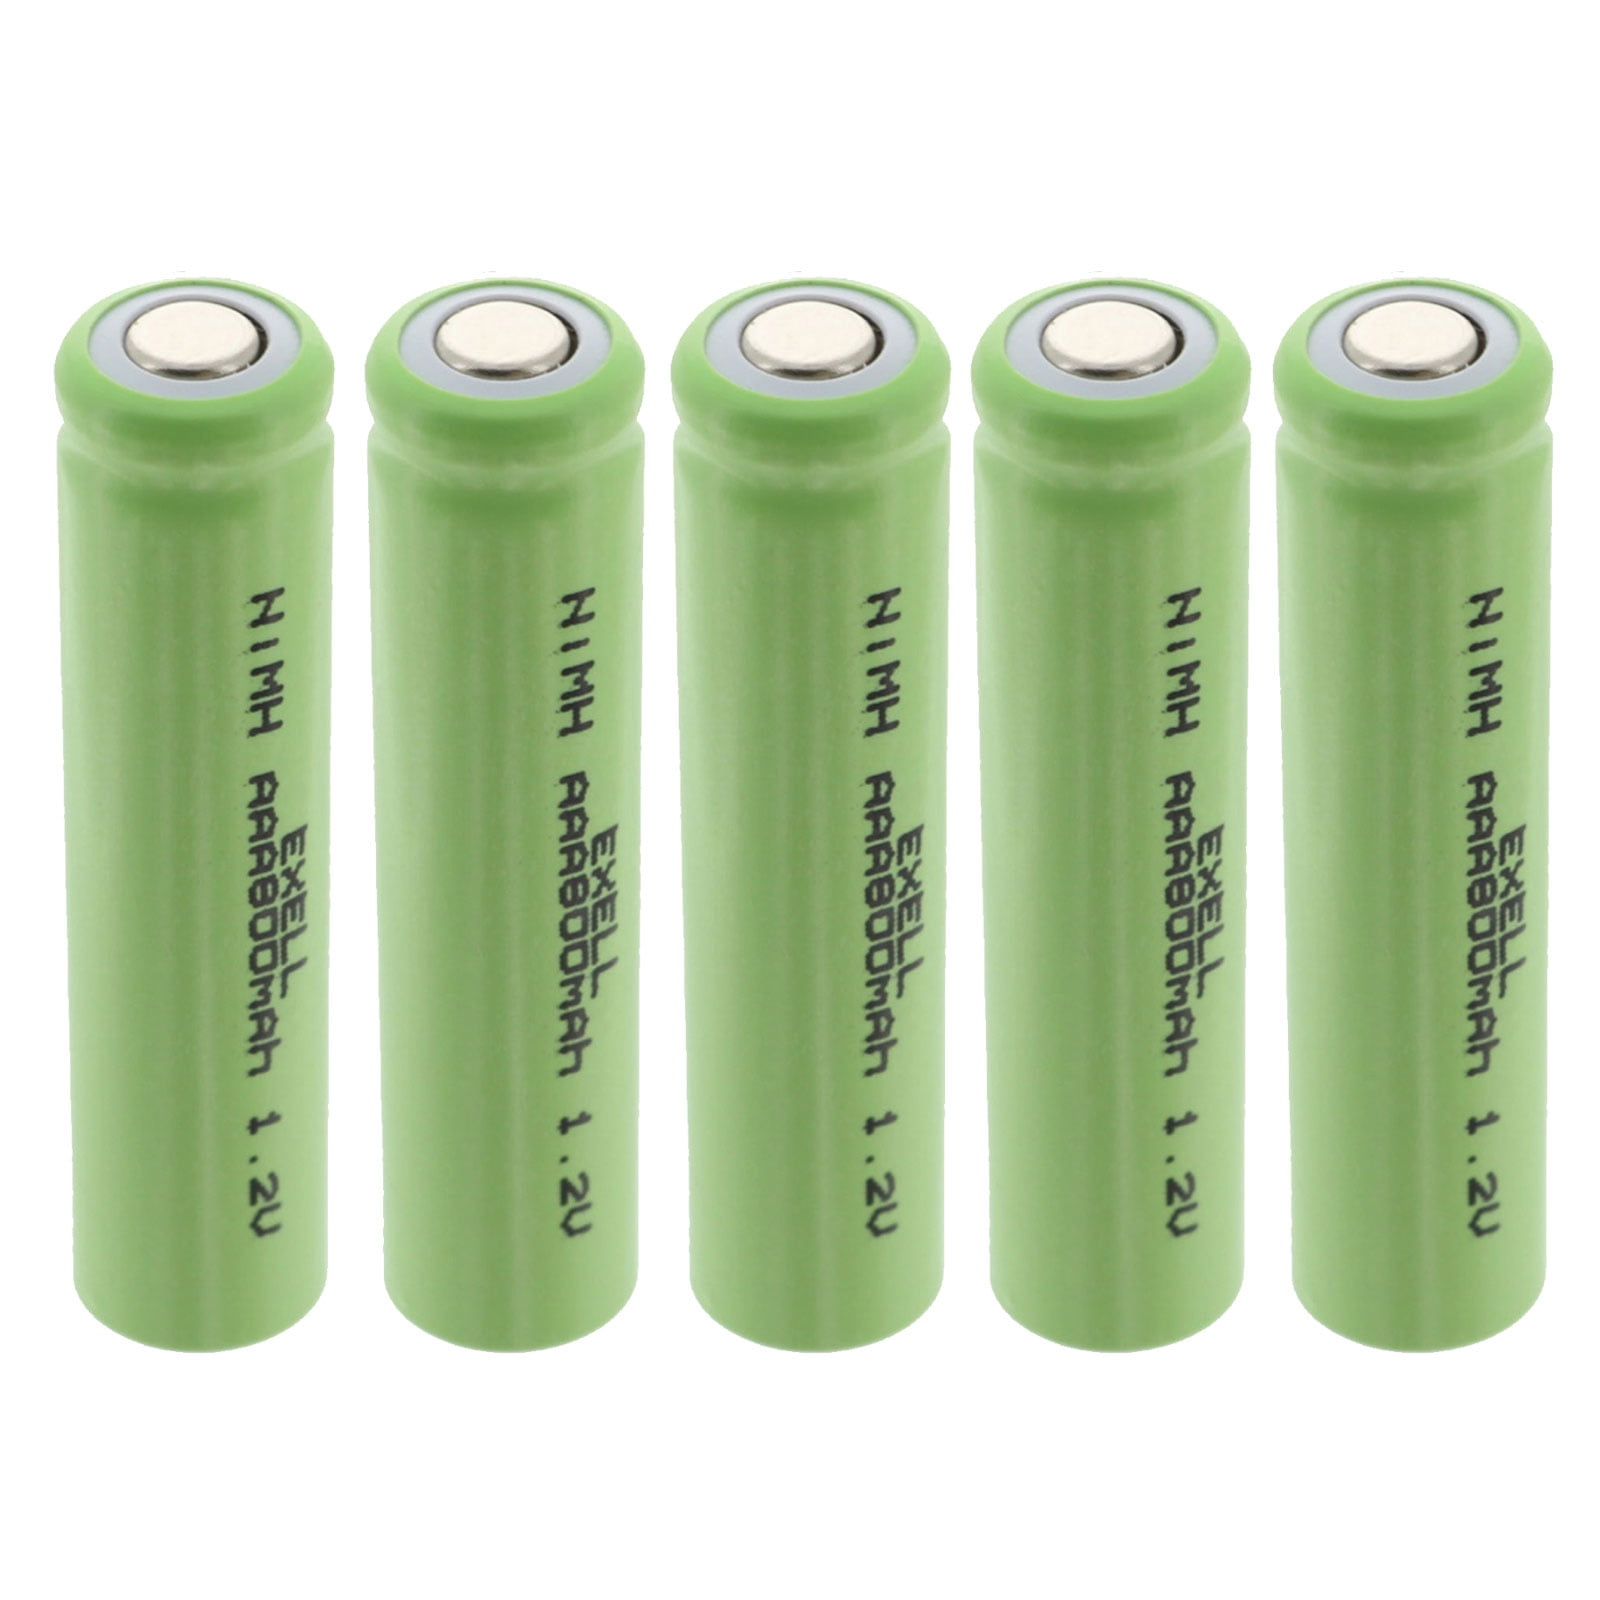 meters electric tools 20x Exell AAA 1.2V 300mAh NiCD Button Top Rechargeable Batteries for high power static applications Telecoms, UPS and Smart grid radios RC devices electric mopeds 